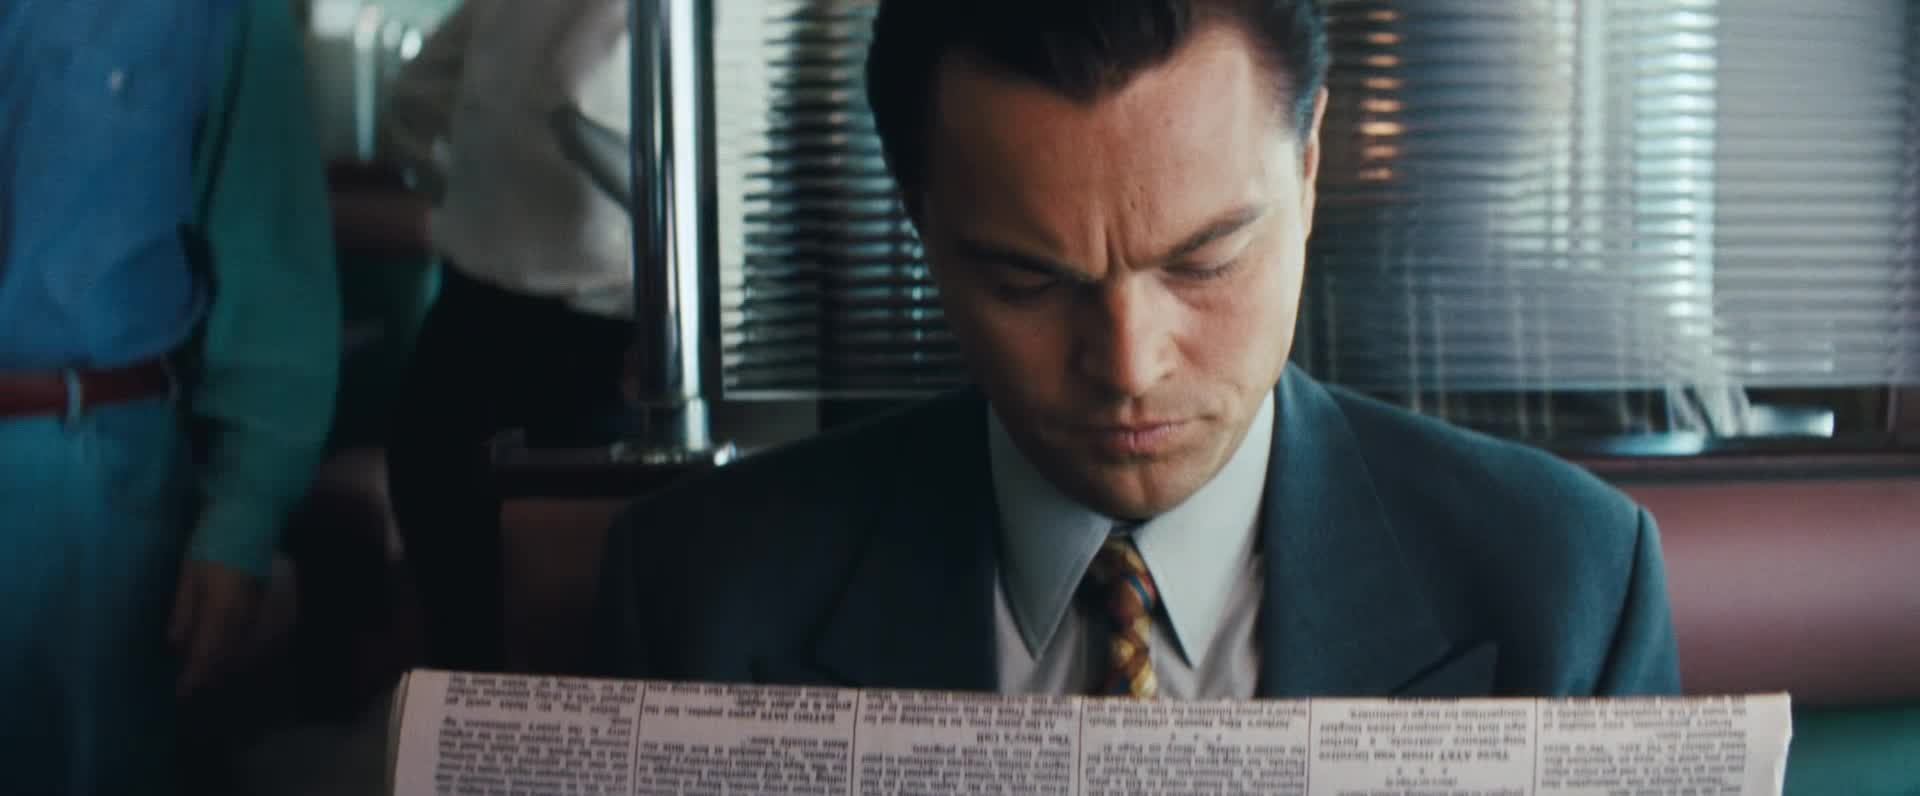 The wolf of wall street eng watch online